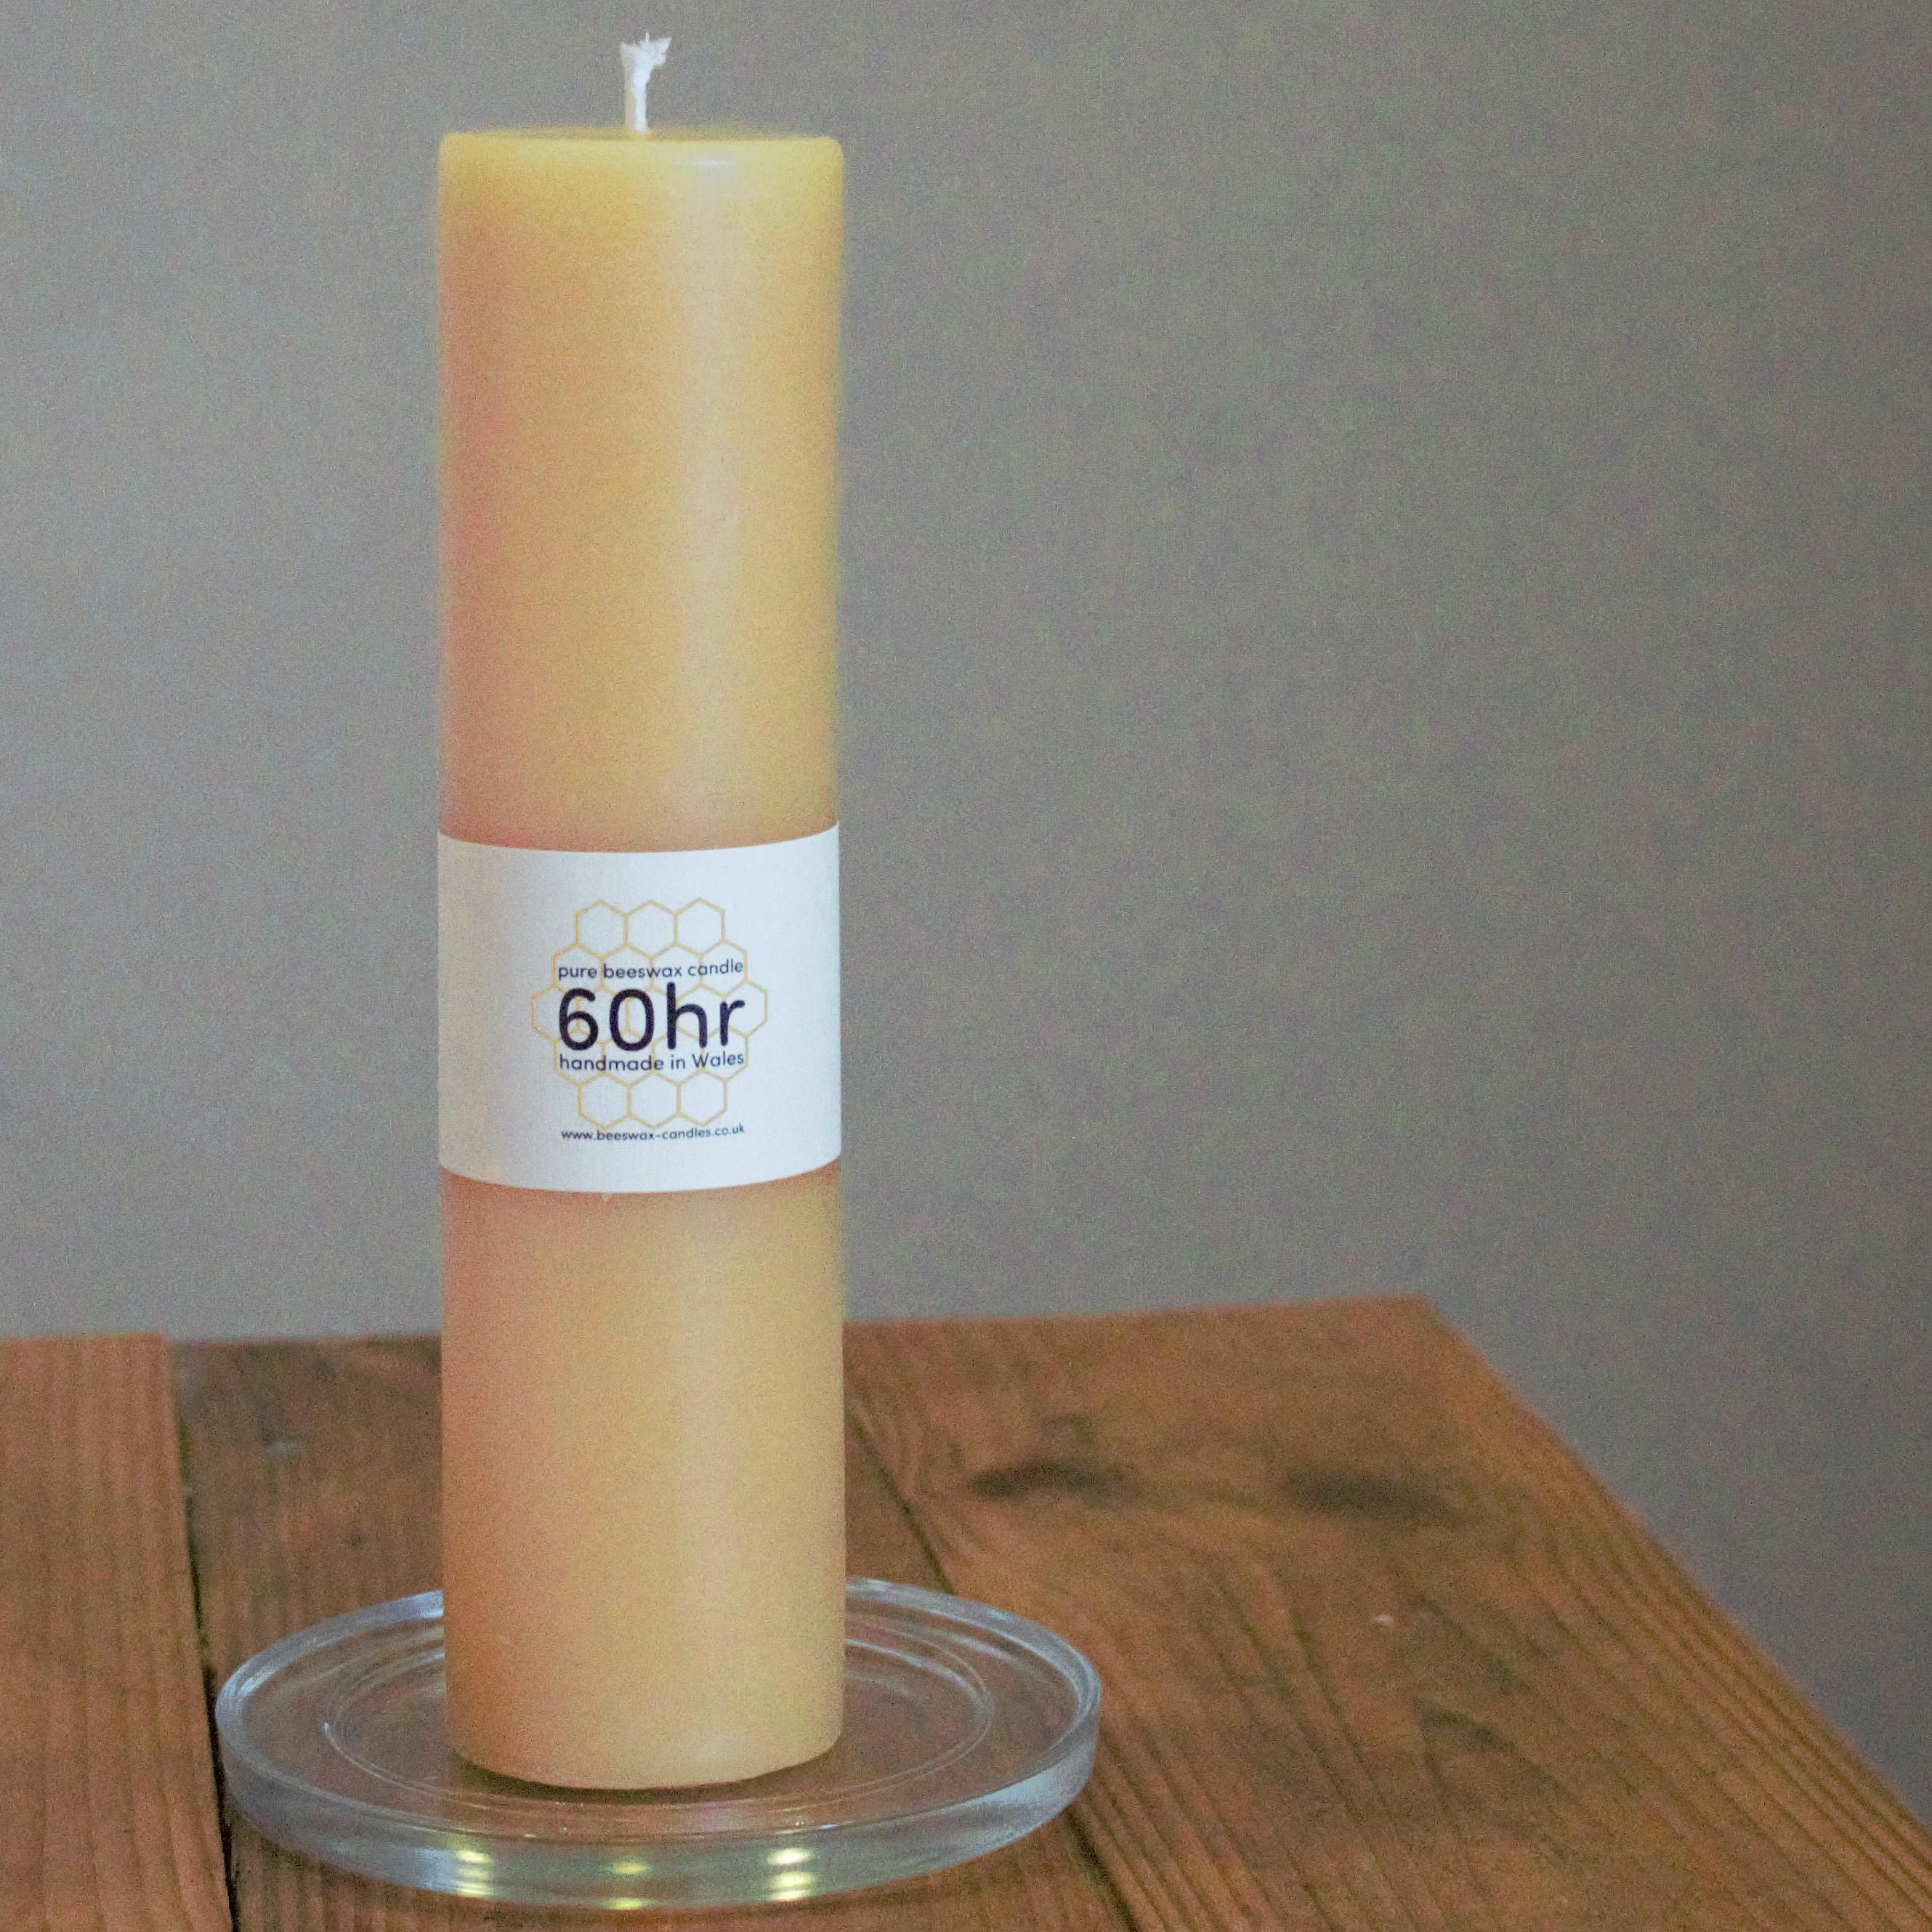 60hr pure beeswax pillar candle